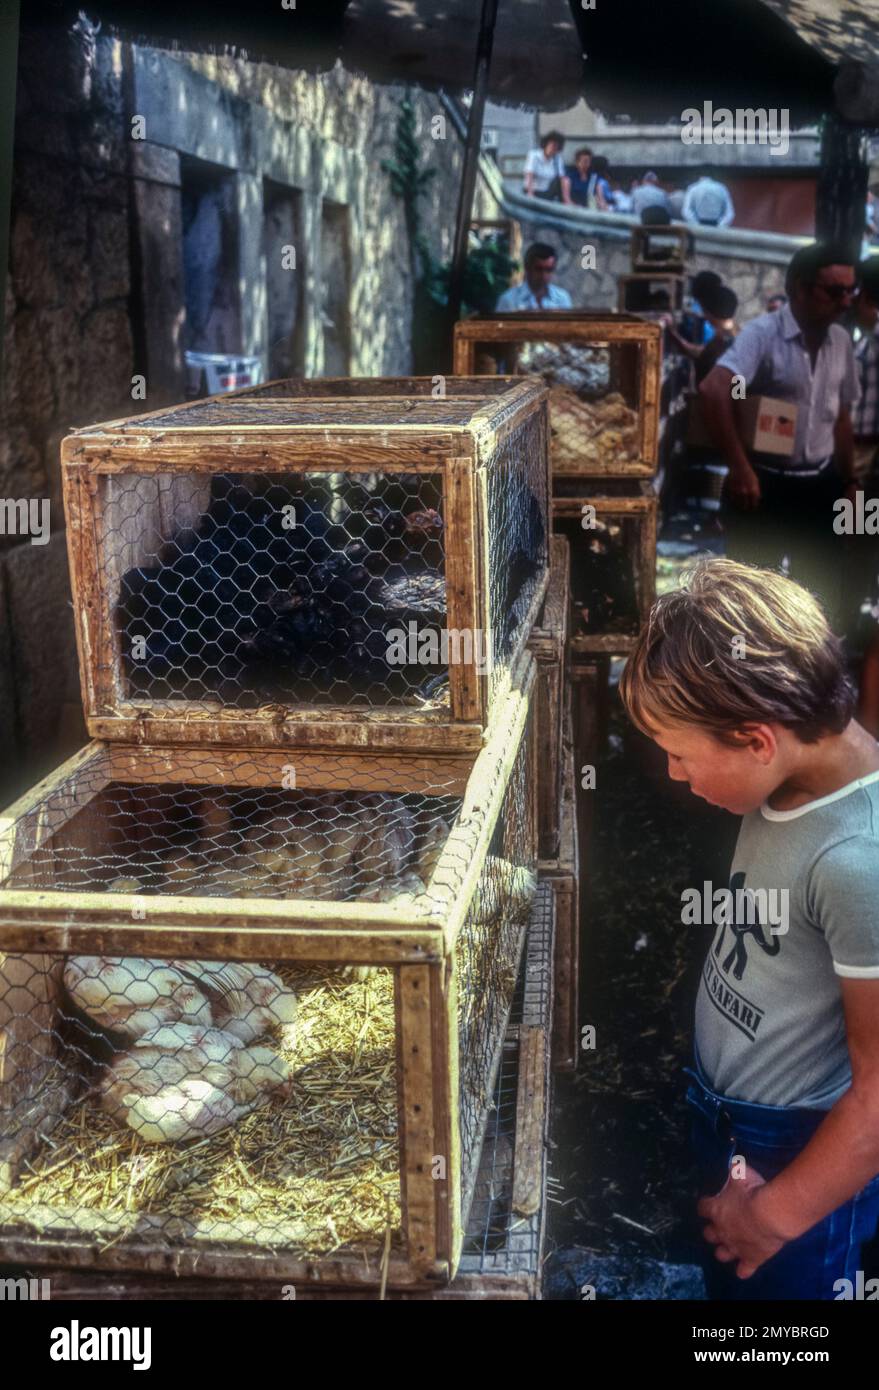 1981 archive image of young boy looking at live poultry for sale on Felanitx market, Majorca, Spain. Stock Photo